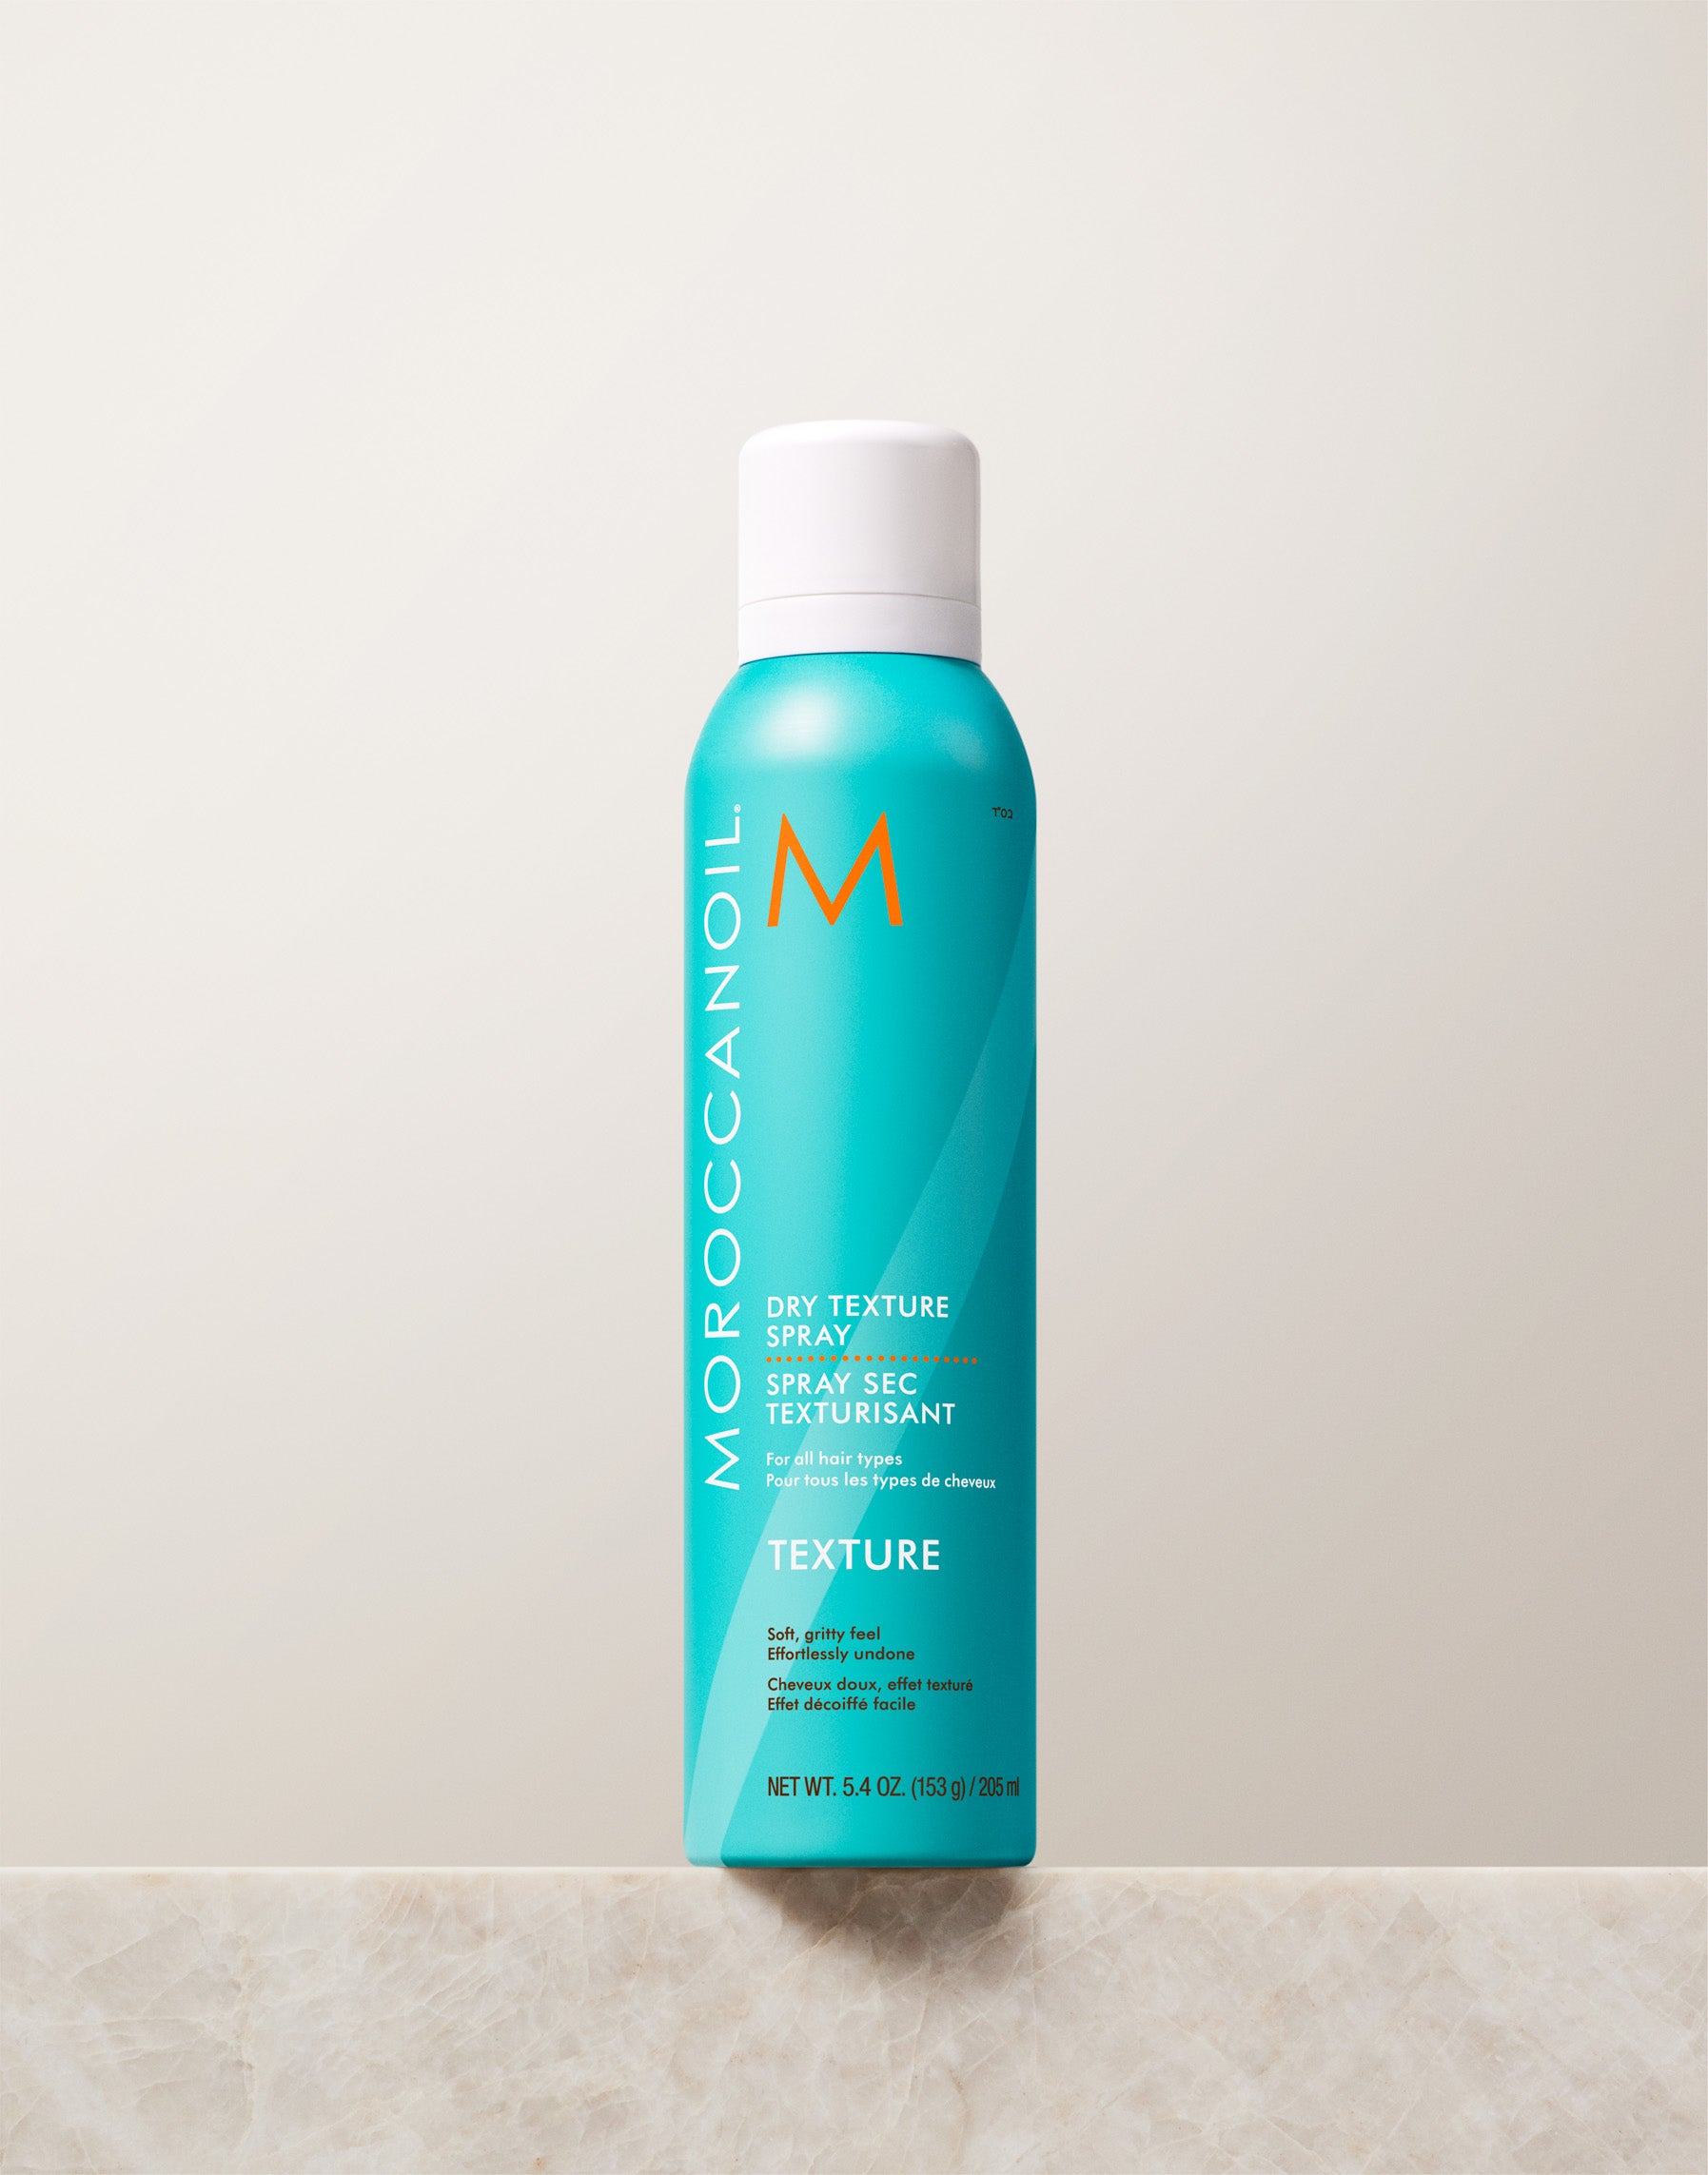 Dry Finish Working Texture Hair Spray for Volume + Texture